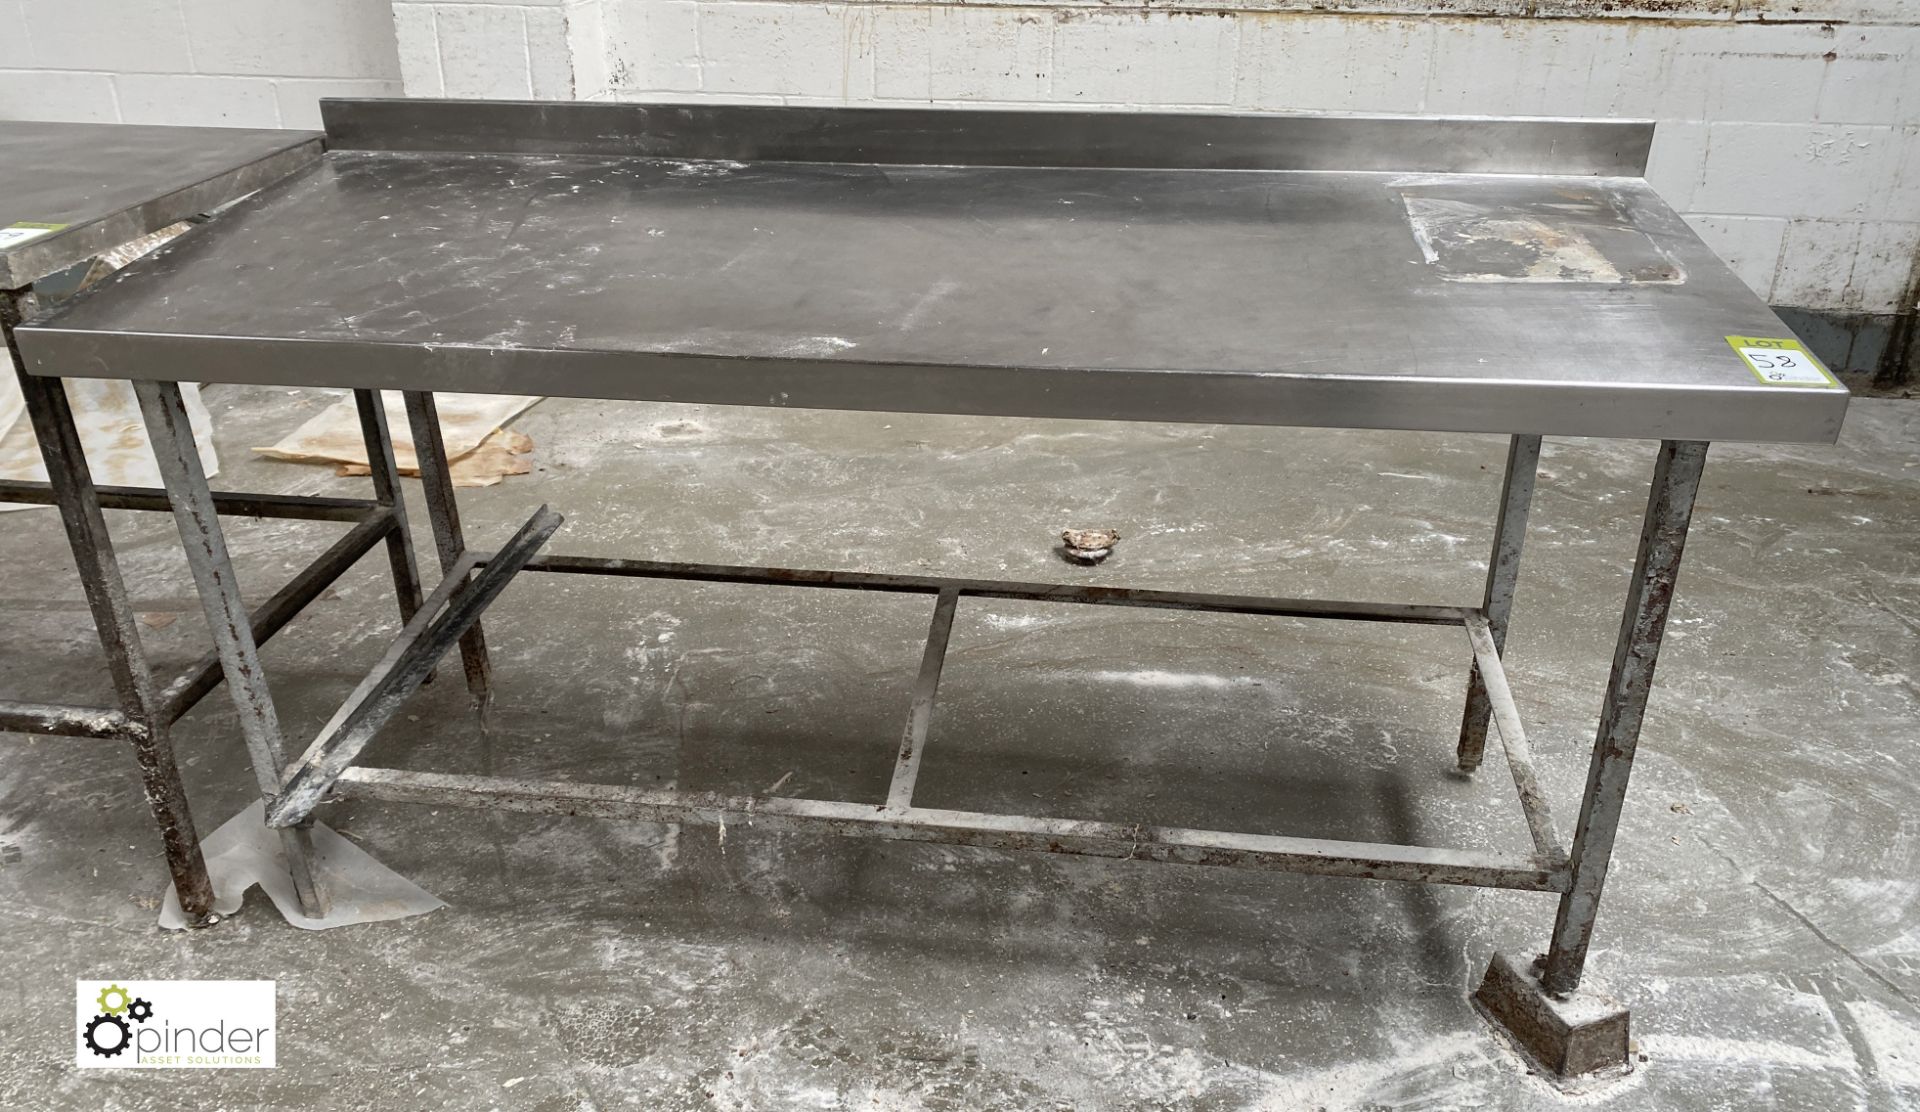 Stainless steel Preparation Table, 1800mm x 700mm x 860mm, with rear lip (located in Unit 29)